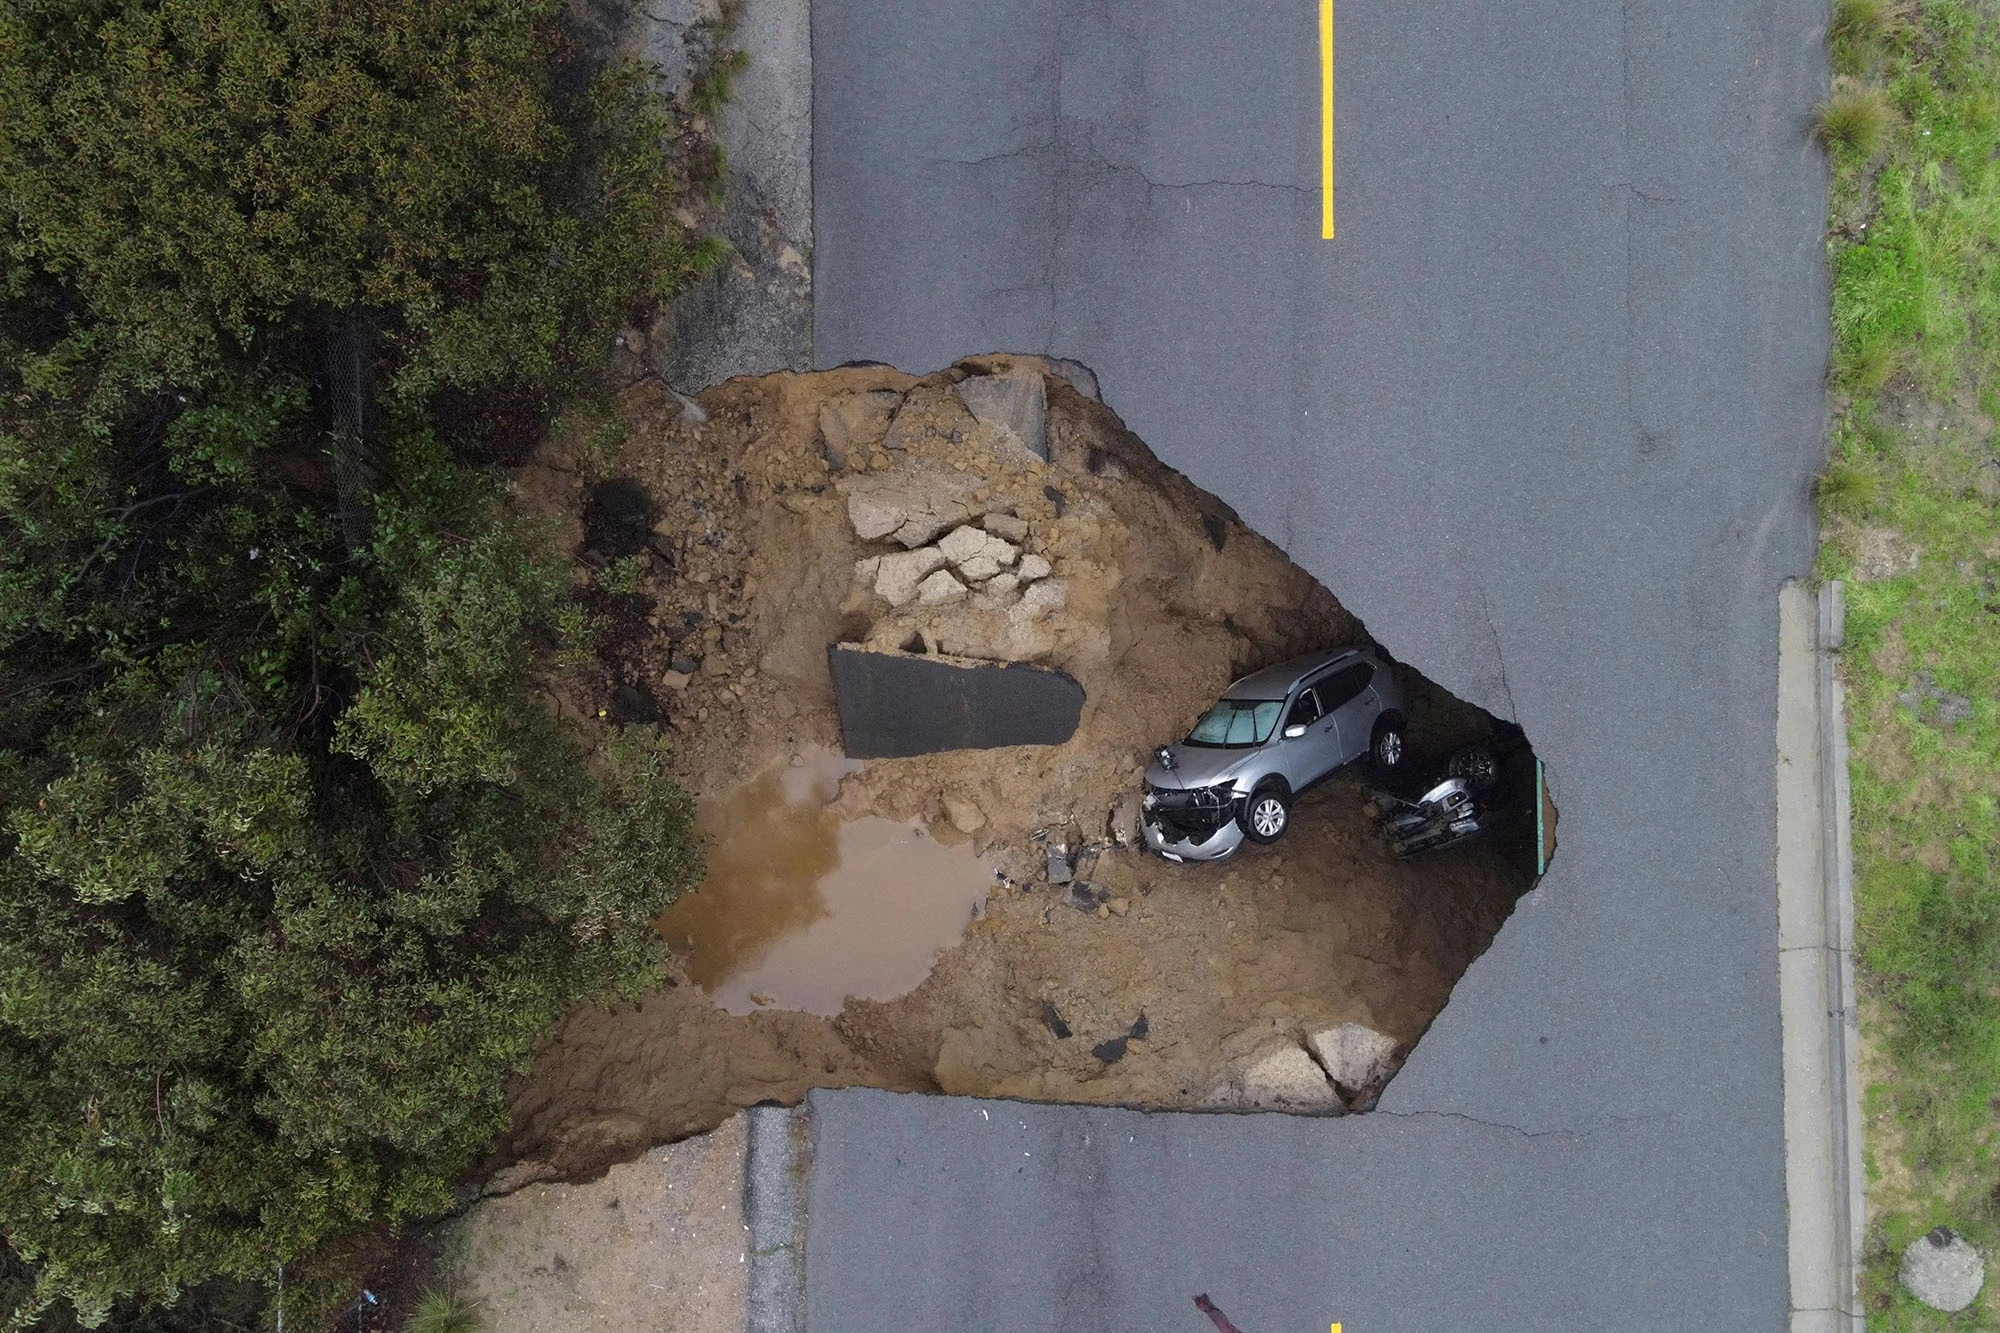 Giant Sinkhole Swallows Car In The Middle Of The Road In California